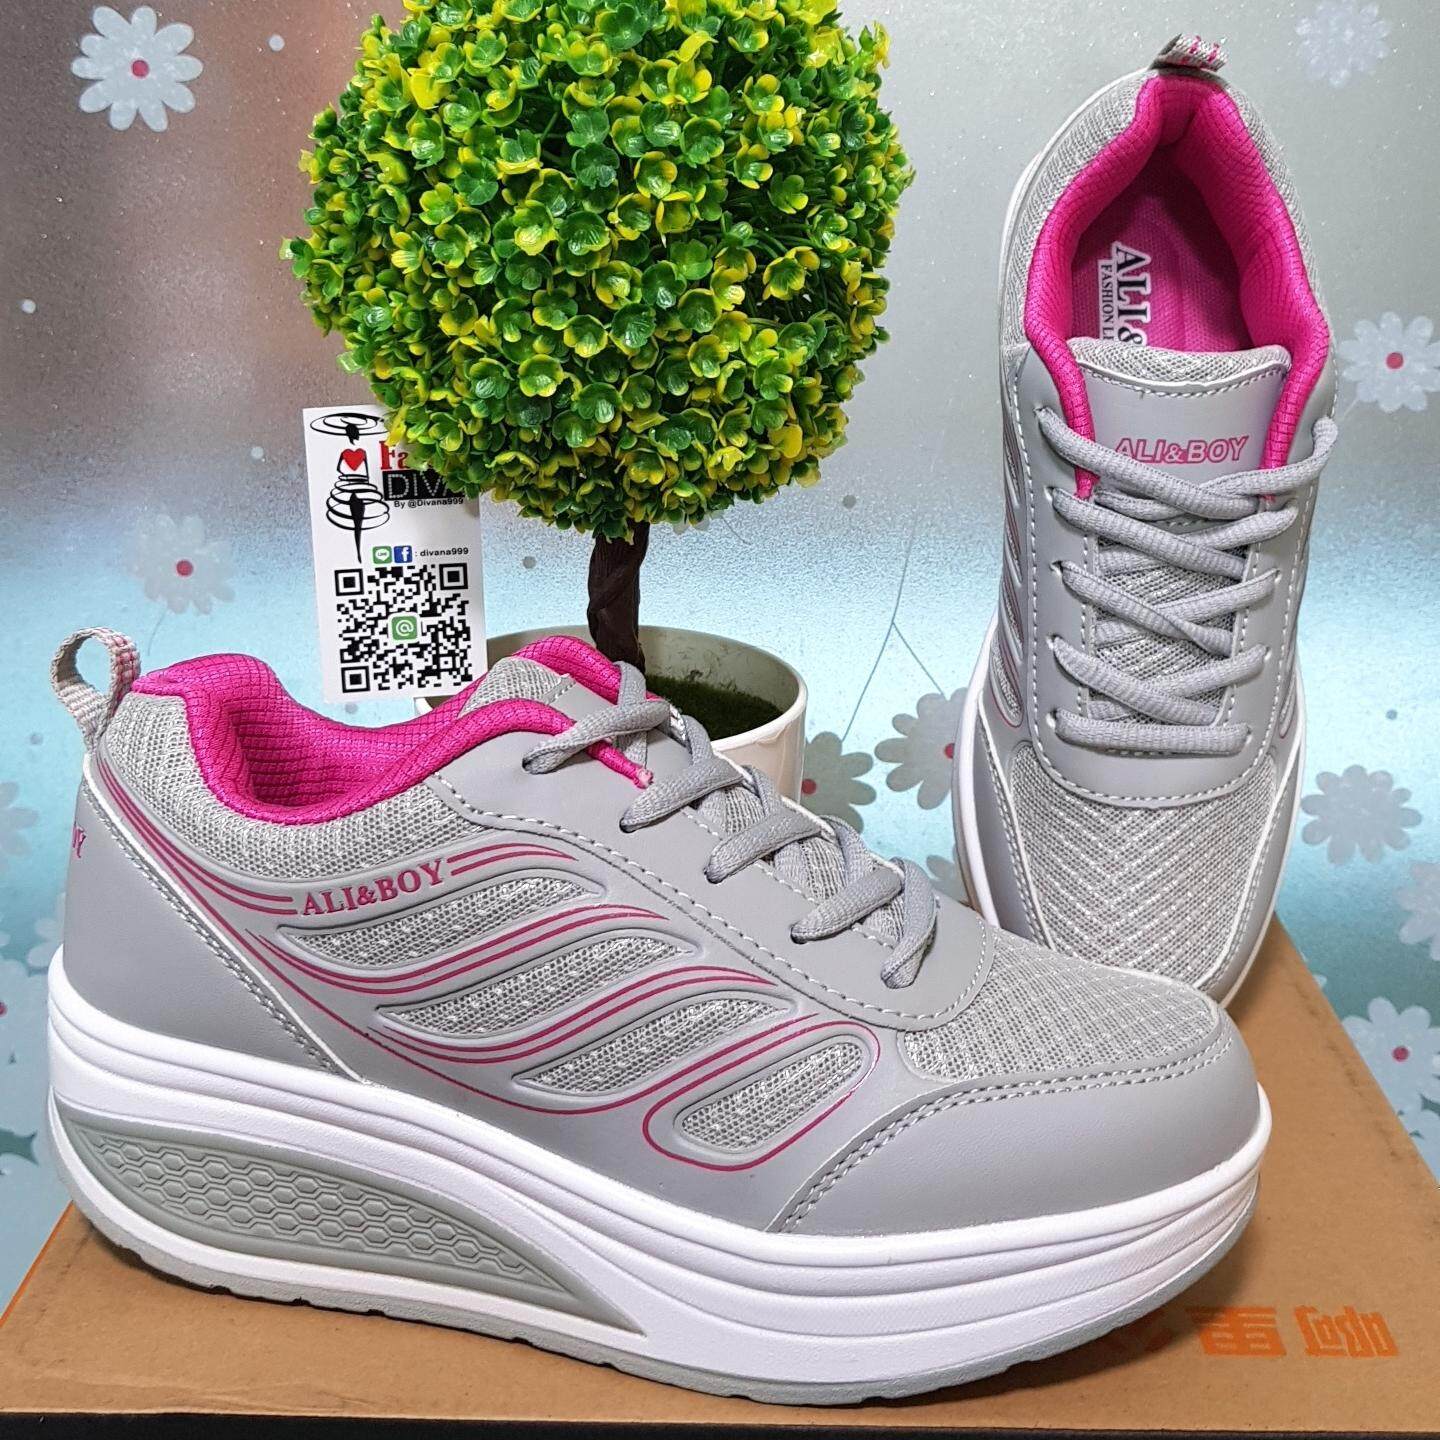 ALI&BOY Brand Women Running Shoes Female Sports Shoes Non Slip Damping Outdoor Pu Leather Sneakers Fitness shoes (ปีกนางฟ้า)